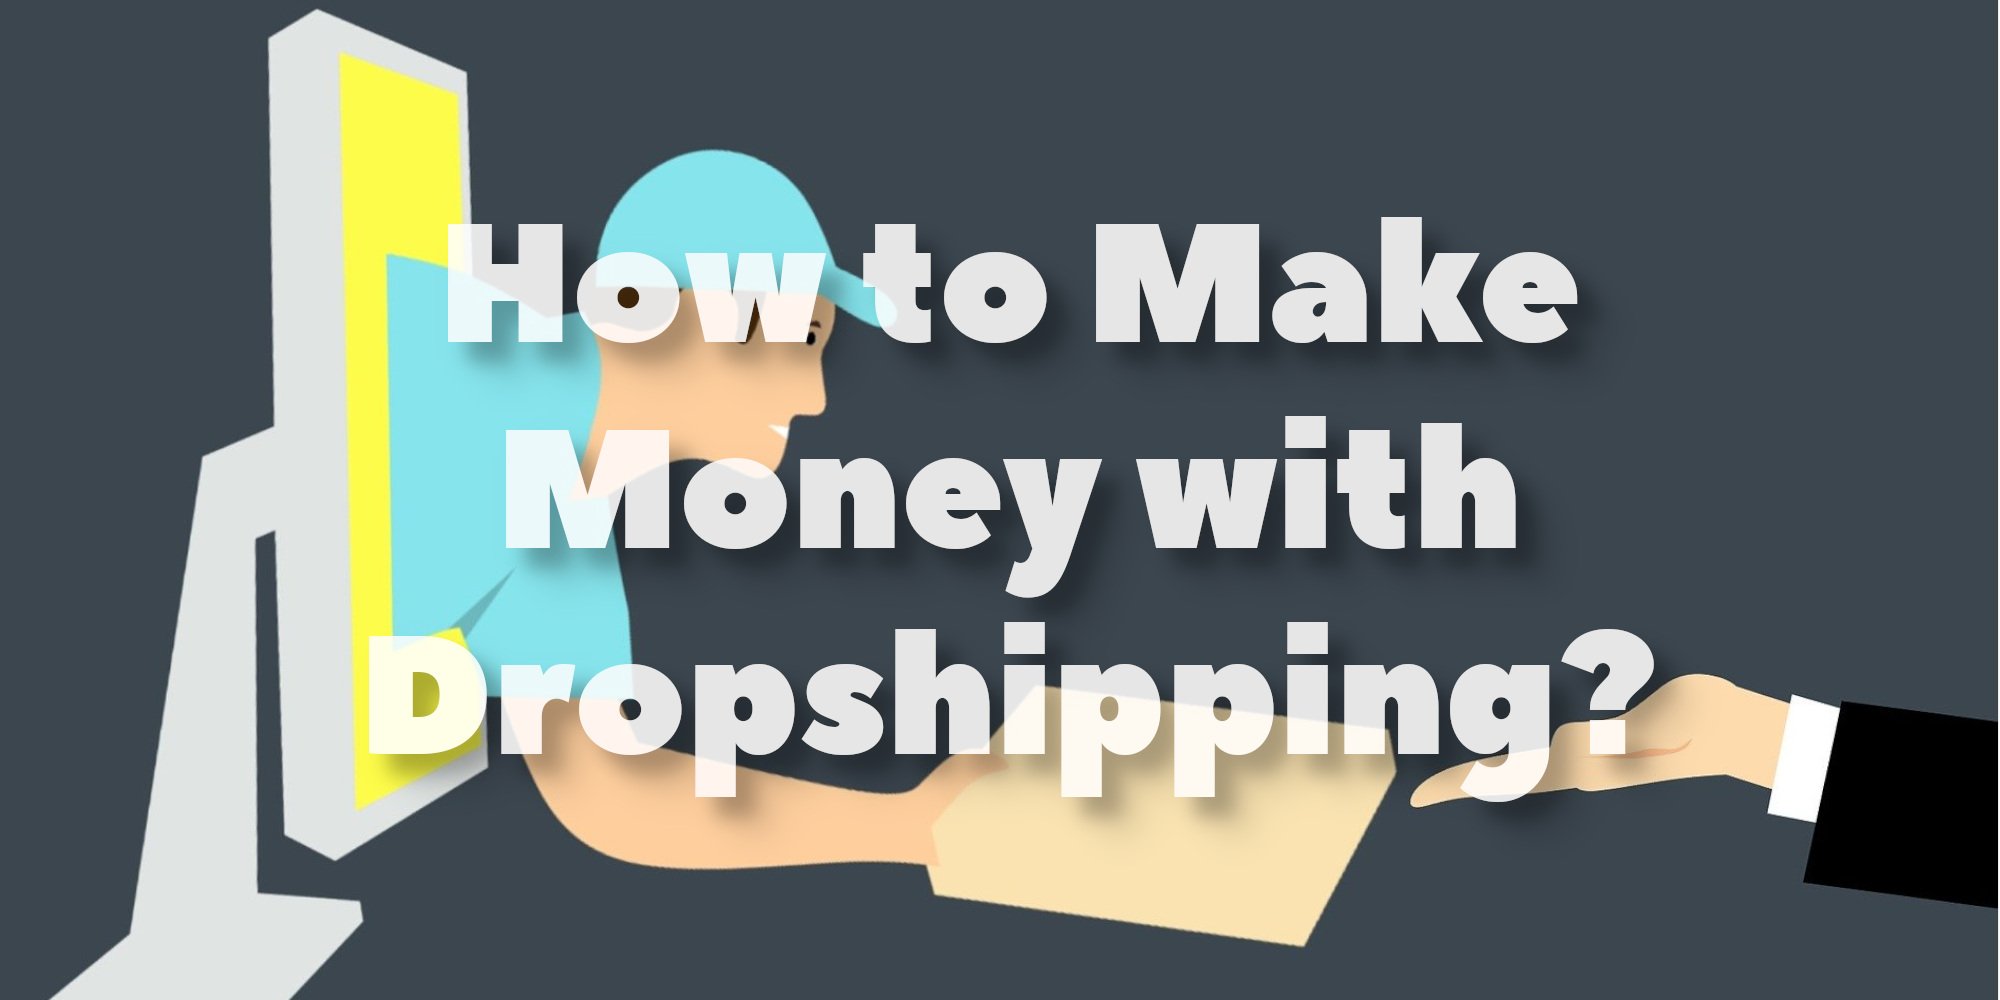 How to Make Money with Dropshipping?